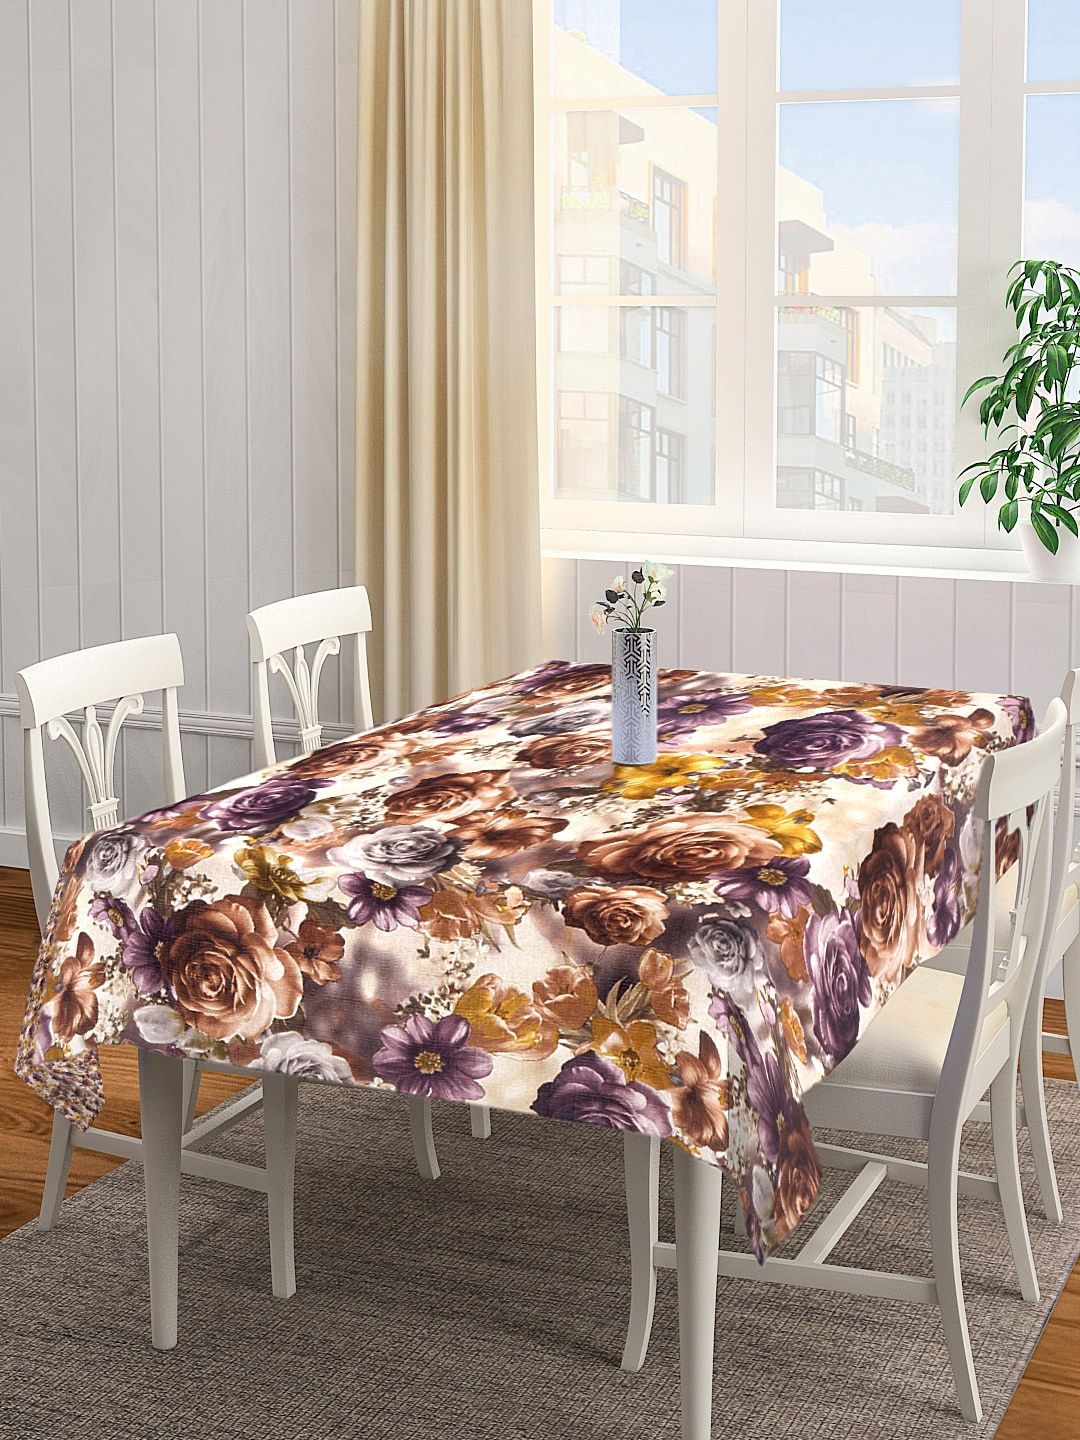 KLOTTHE Off-White & Purple Printed Cotton 6-Seater Rectangular Table Cover Price in India